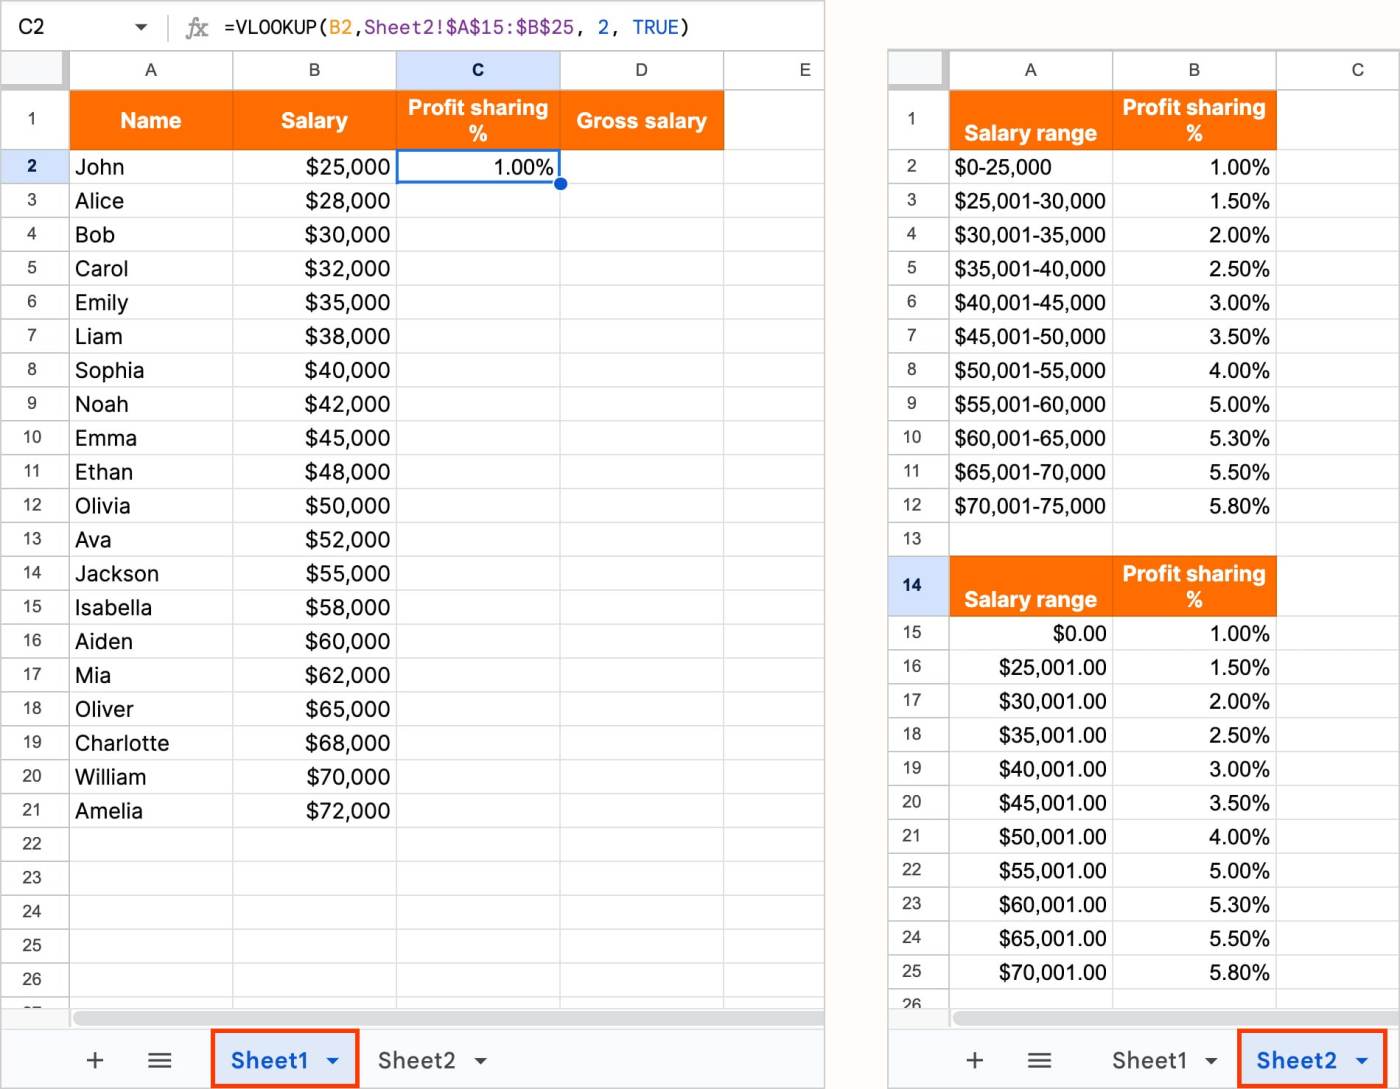 Screenshot of two separate sheets within the same Google Sheet that are linked to the same VLOOKUP function.